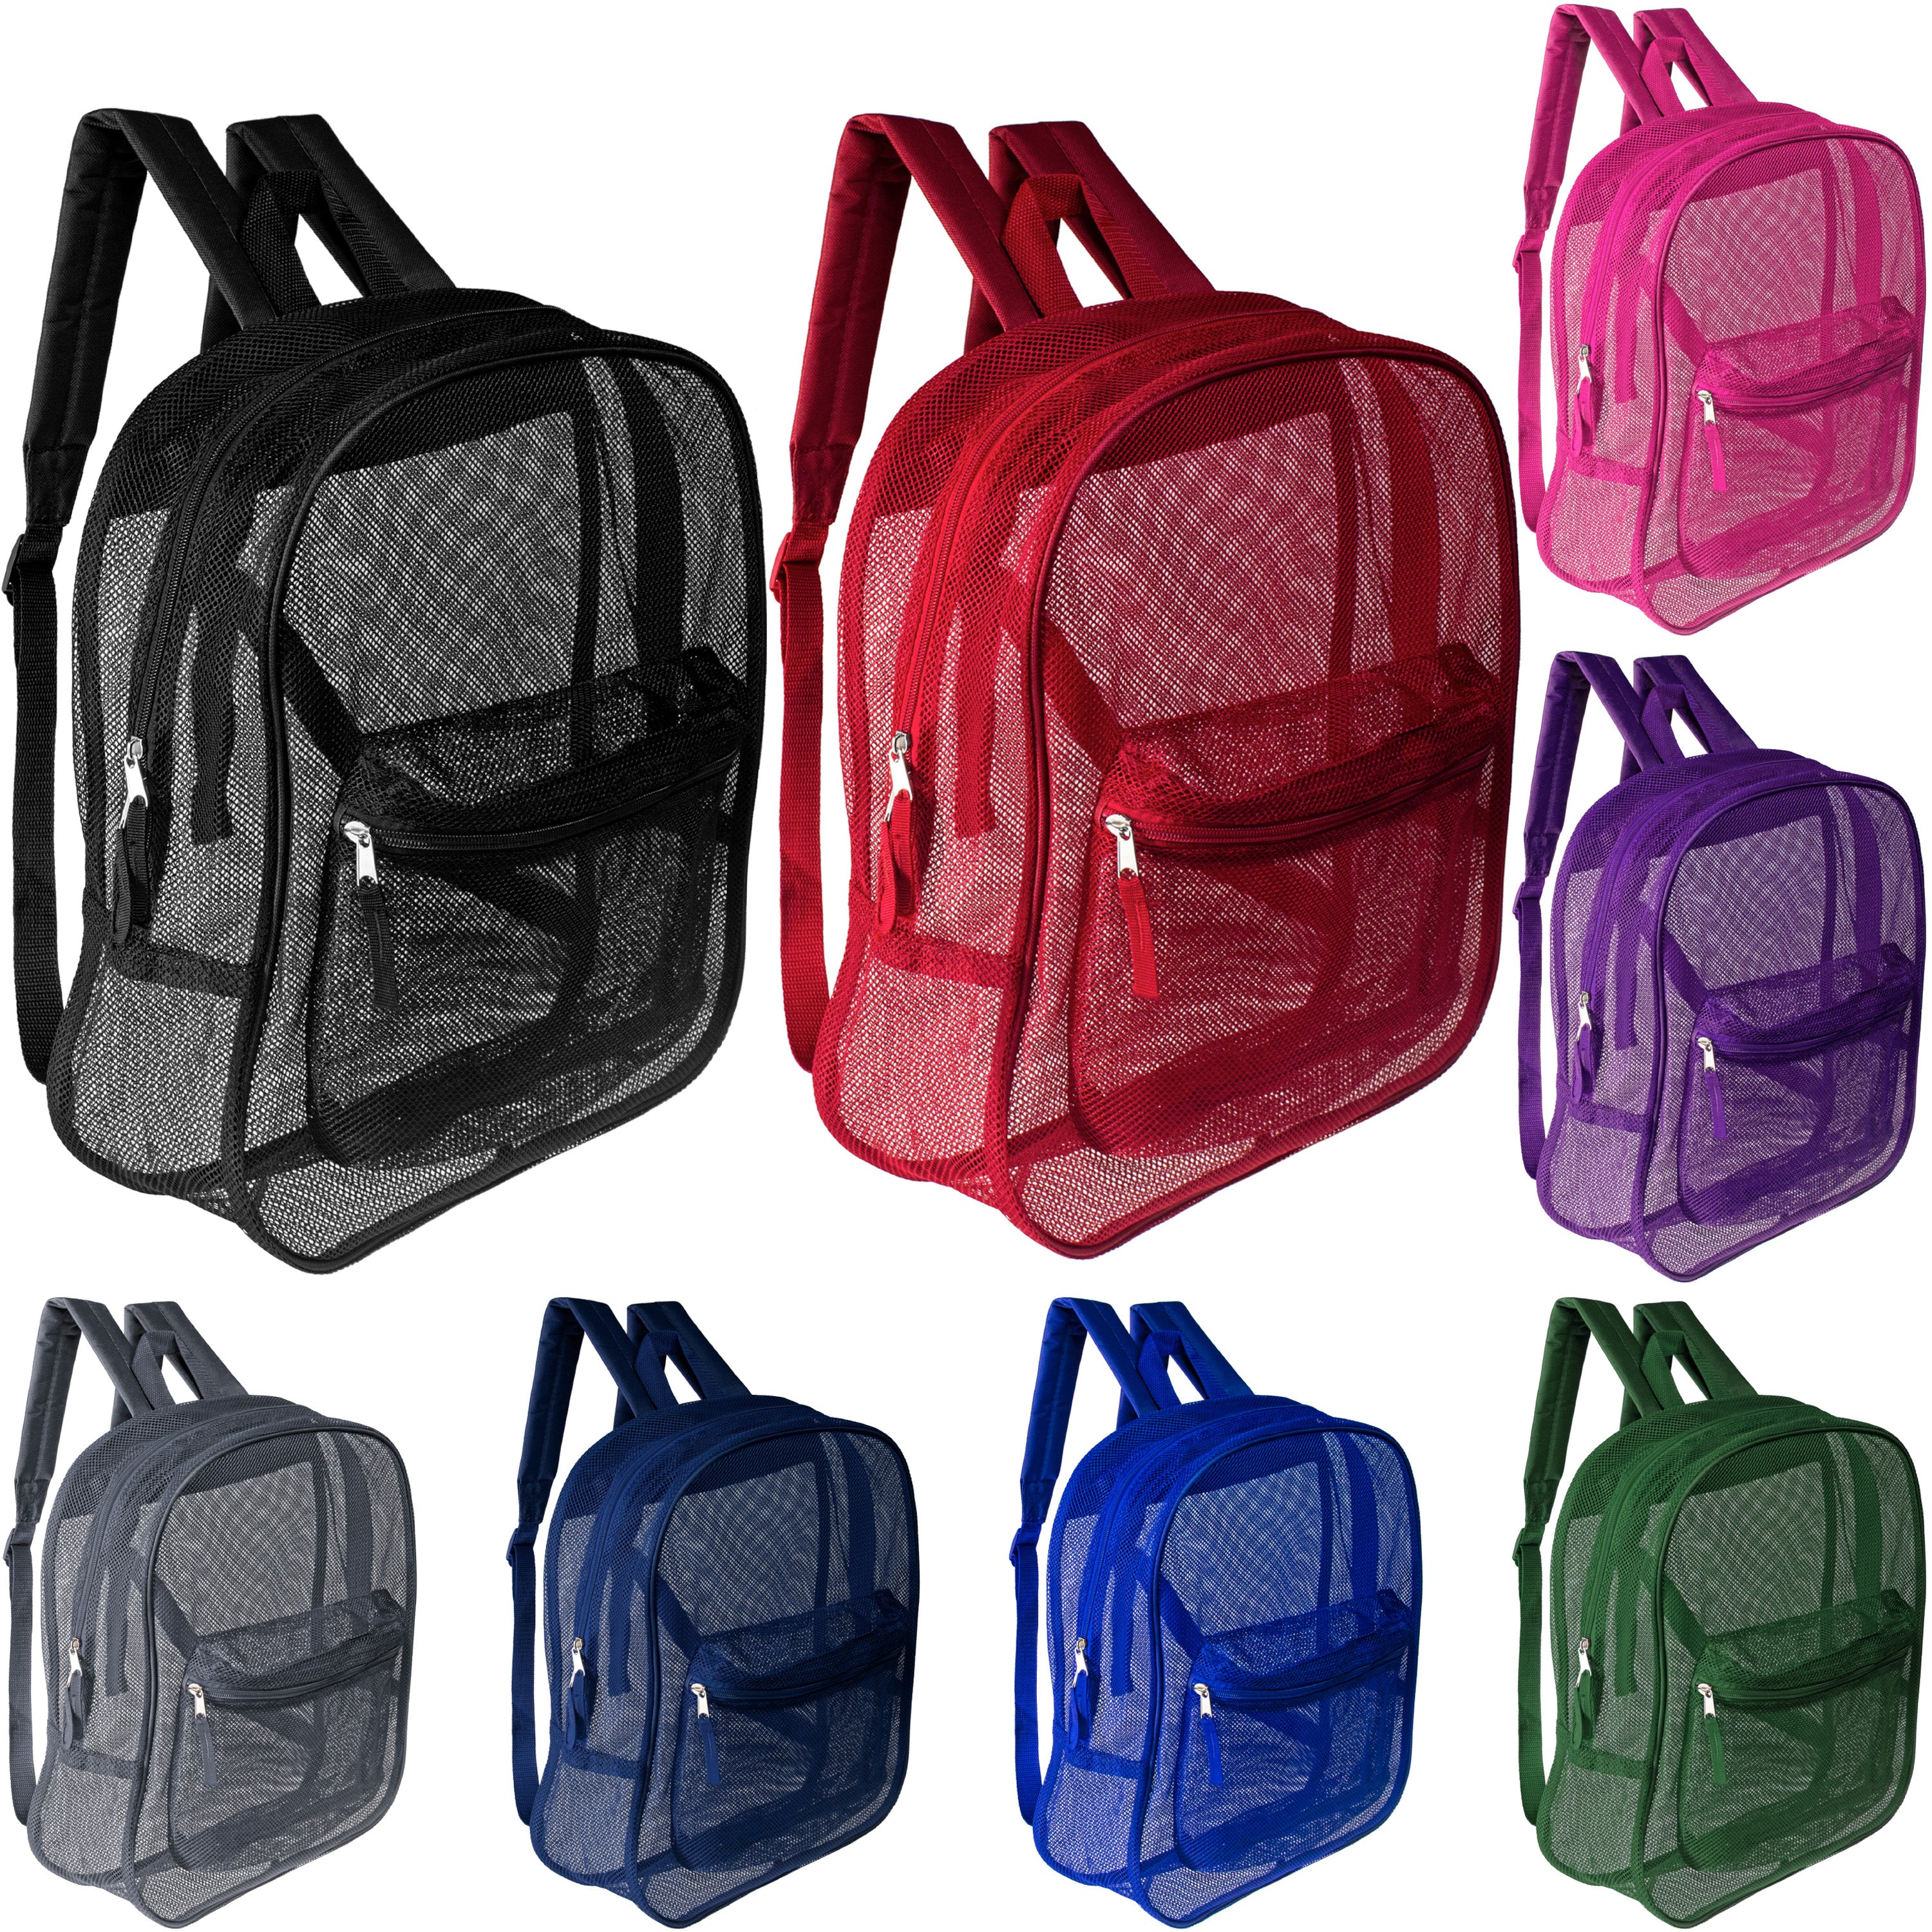 17" Wholesale Mesh Assorted Colors Backpack in 8 Colors - Bulk Case of 24 Backpacks